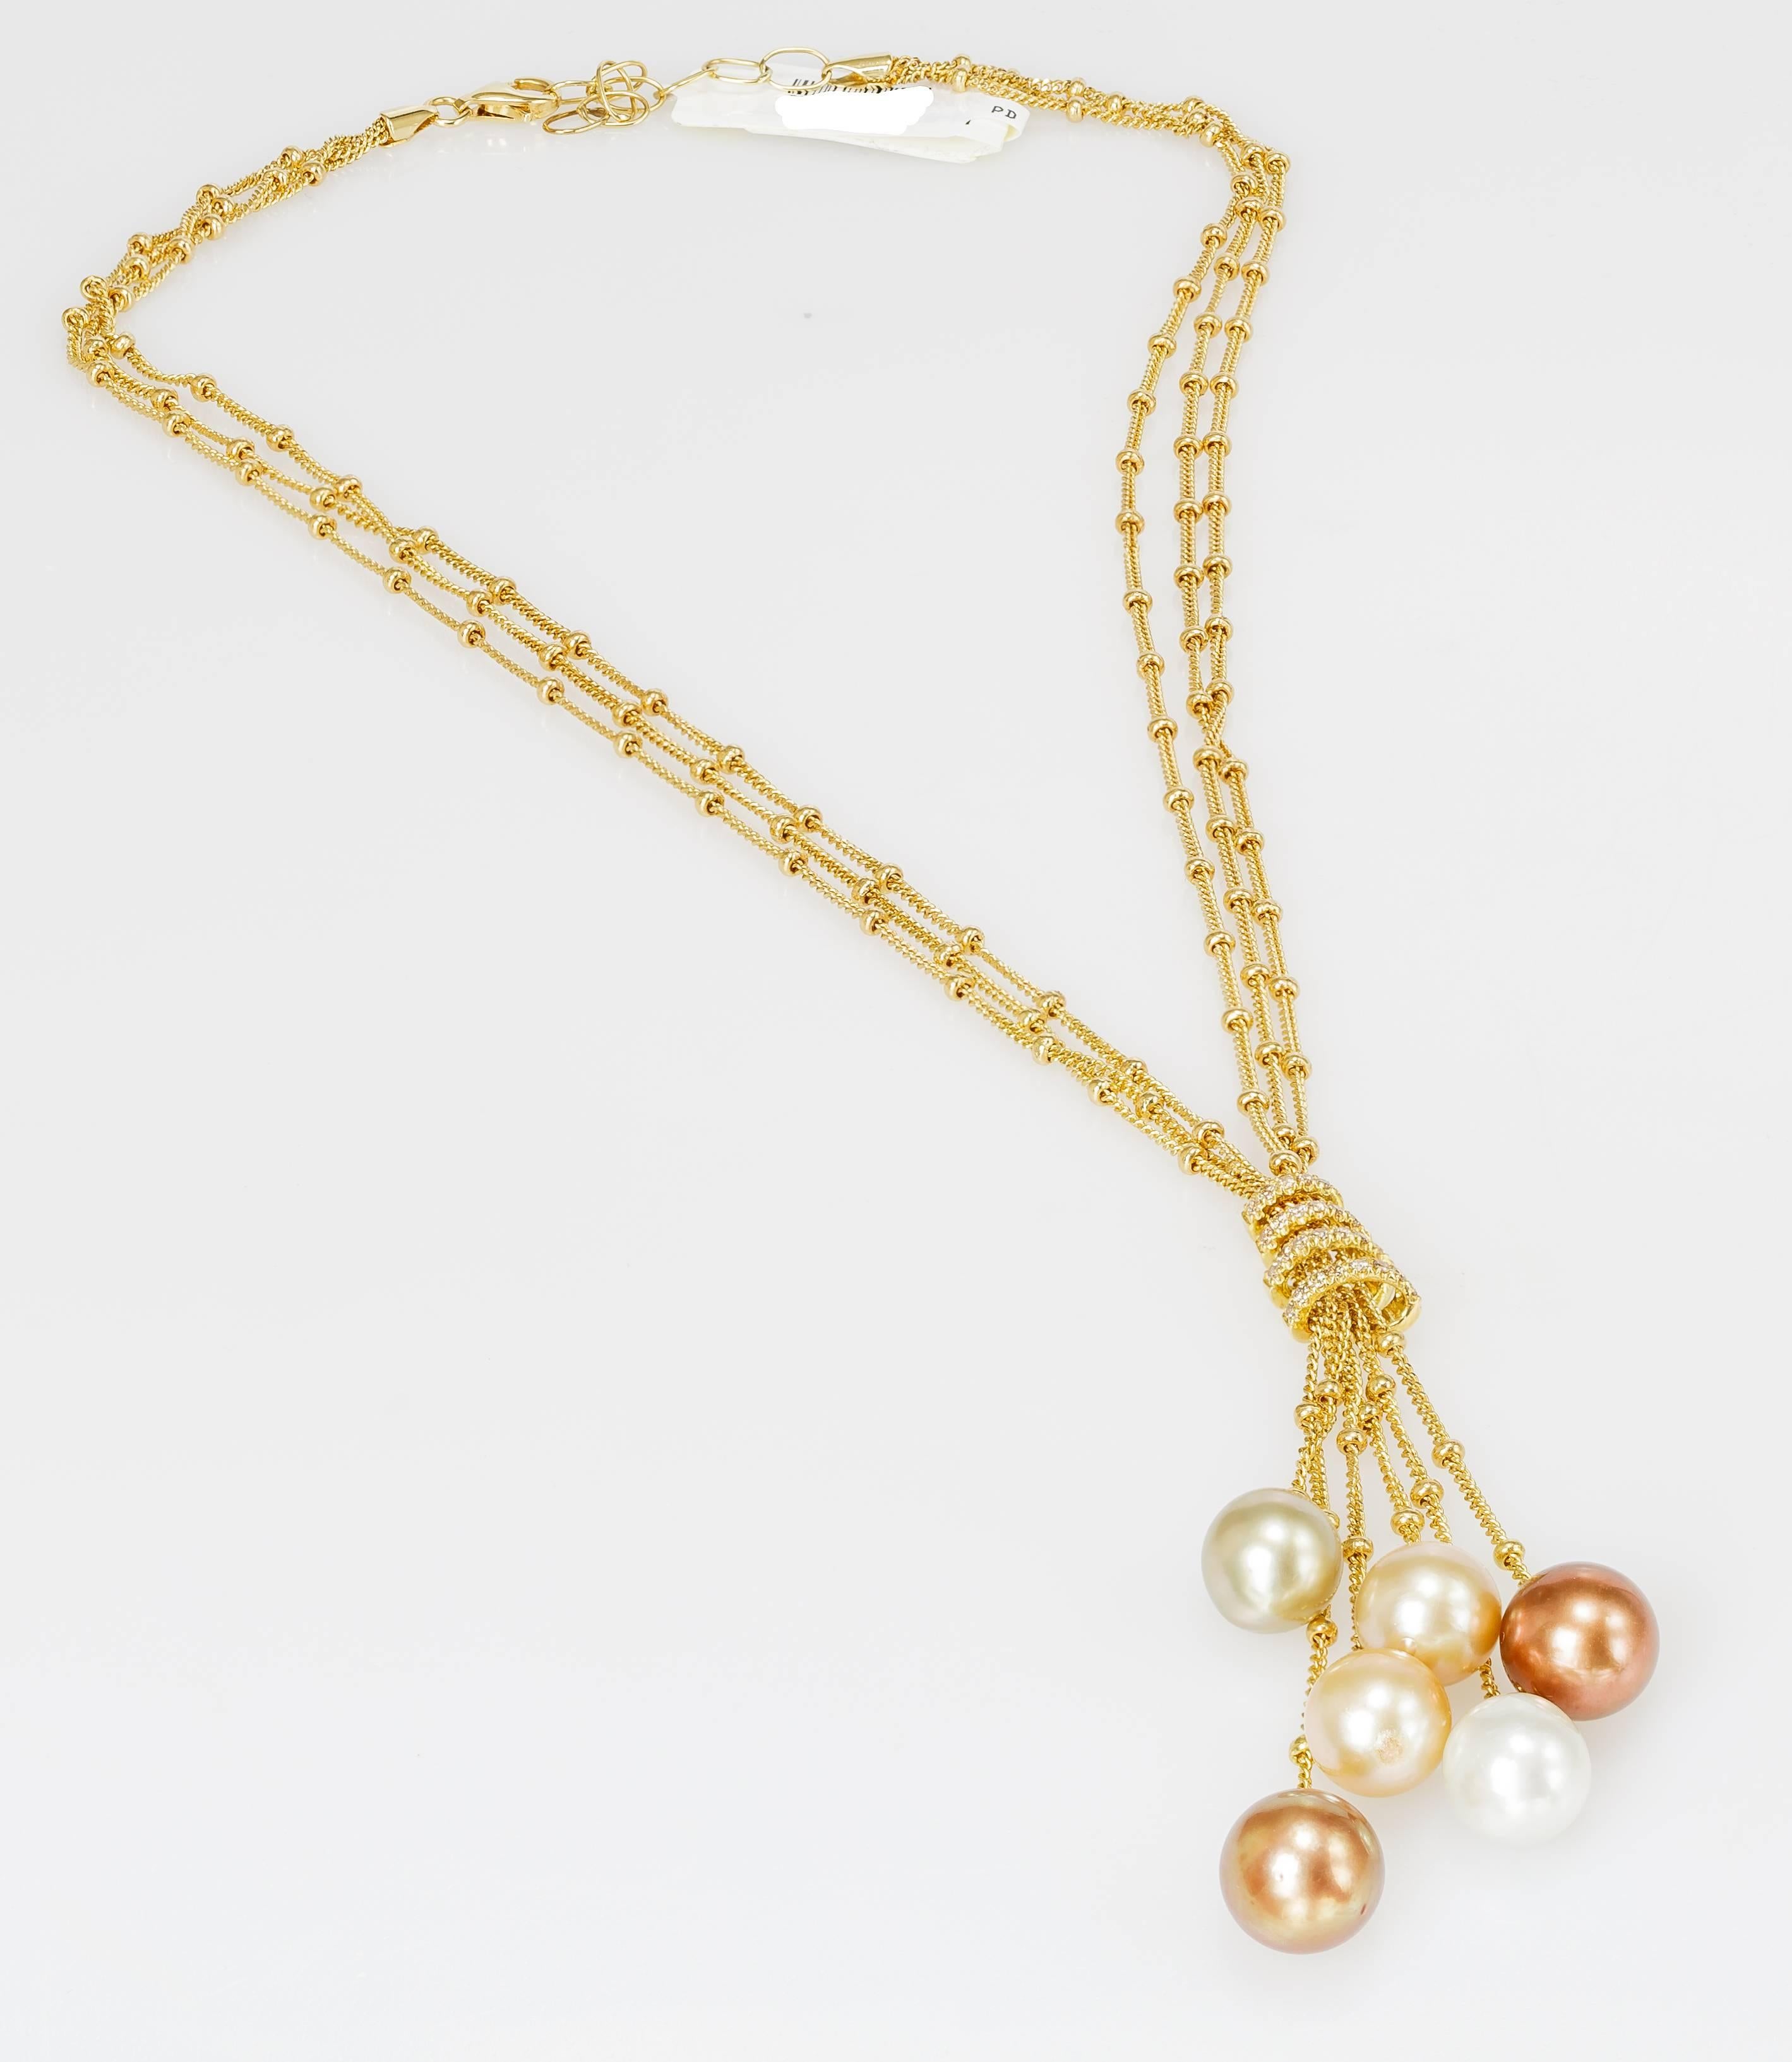 This Yvel necklace features six South Sea pearls hanging from 18k yellow gold and is set with diamonds totaling 0.26ct.  The chain measures 16 inches long.